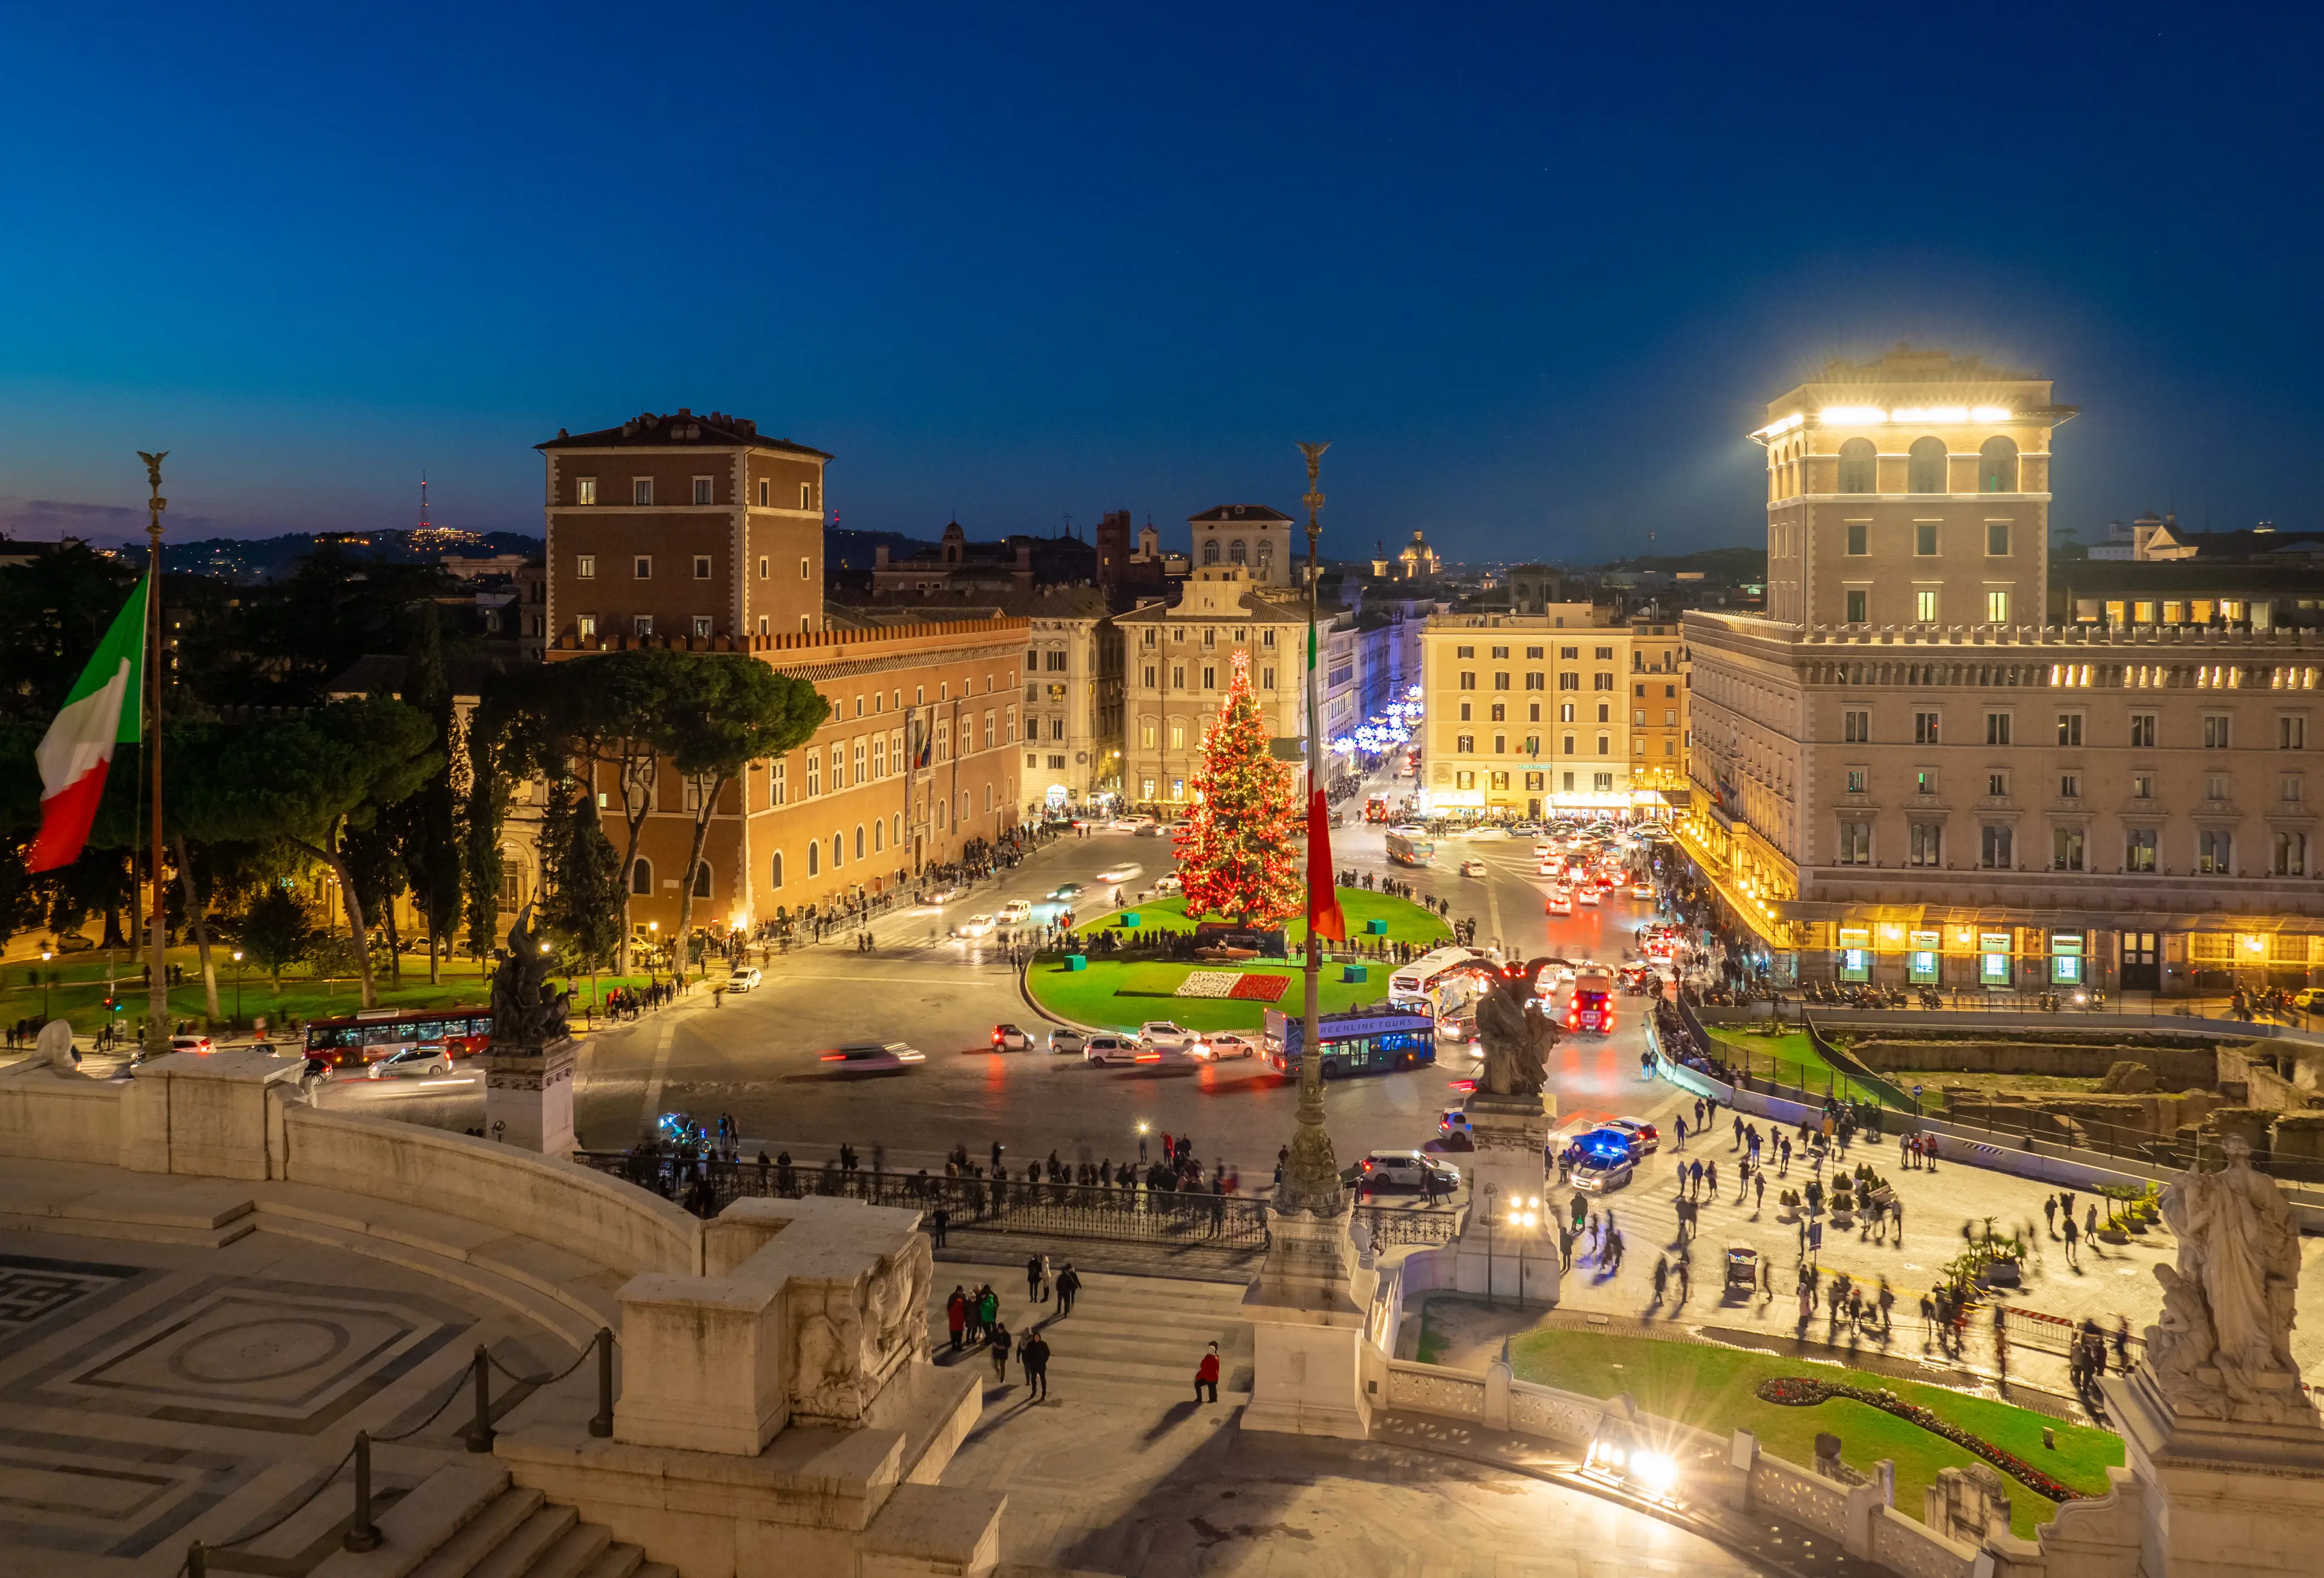 Piazza Venezia square in during the Christmas holidays